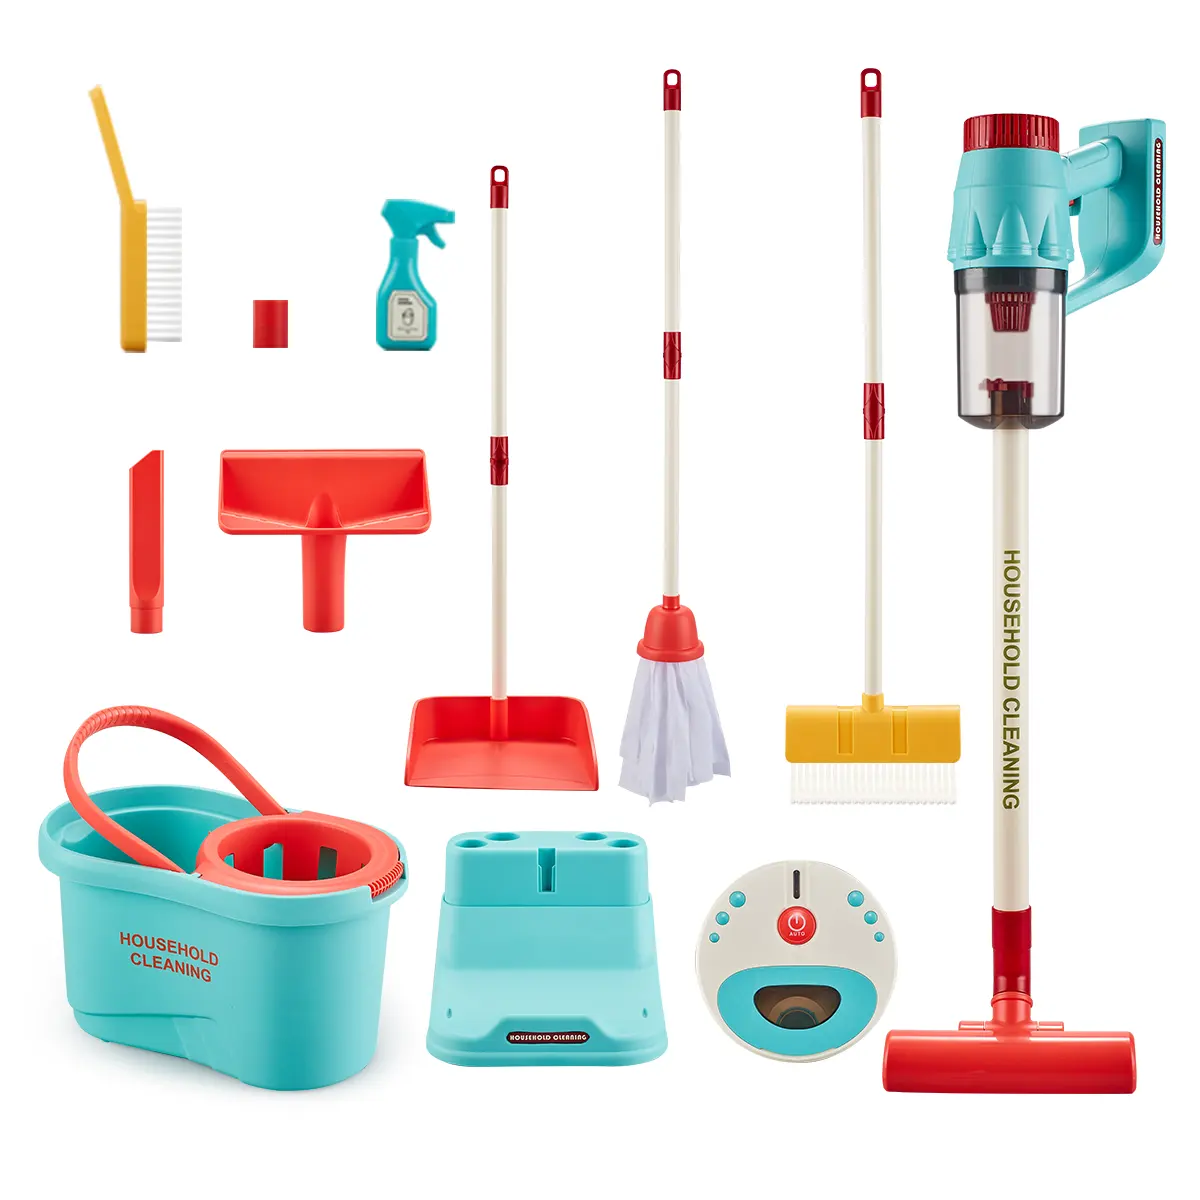 Simulation home appliances toys vacuum cleaner, vacuum cleaner, mop bucket and other cleaning package children's play toys